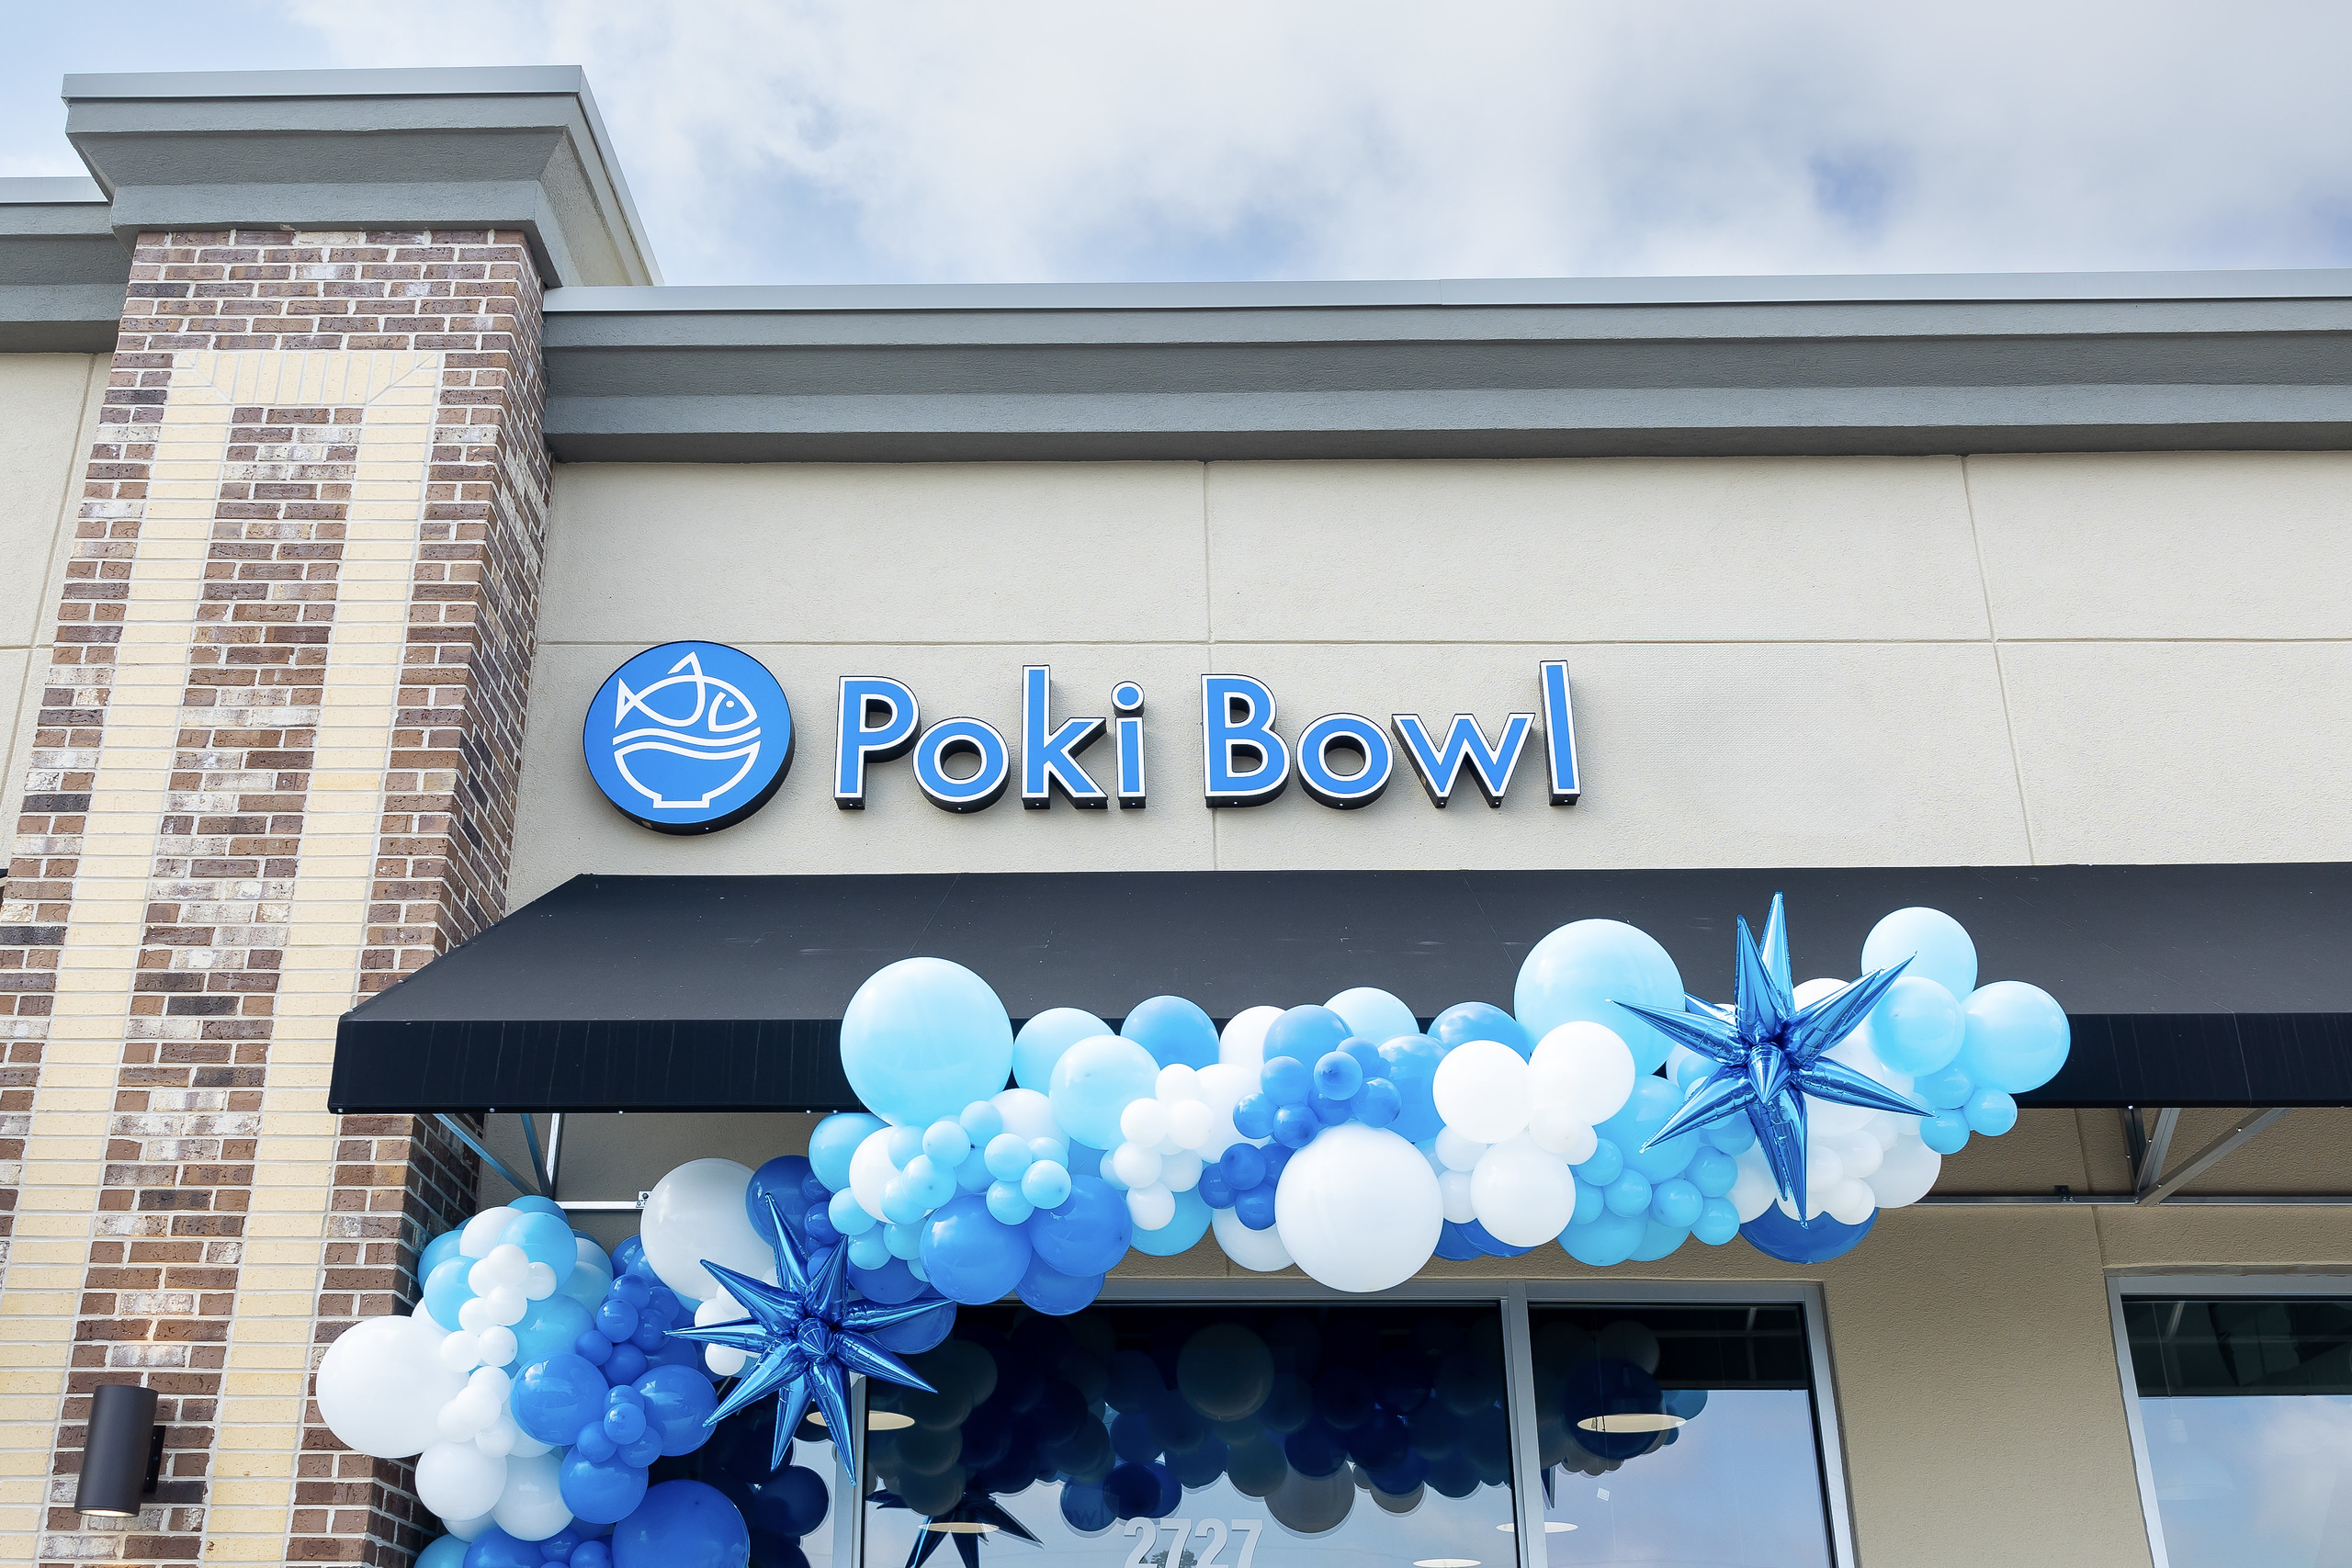 RAYWEST DESIGNBUILD is excited to announce the successful completion of the highly-anticipated Poki Bowl project in Fayetteville, North Carolina. Serving as the construction partner for this national franchise, RAYWEST DESIGNBUILD has delivered an exceptional Poki Bowl location, further enhancing the culinary landscape of the area.